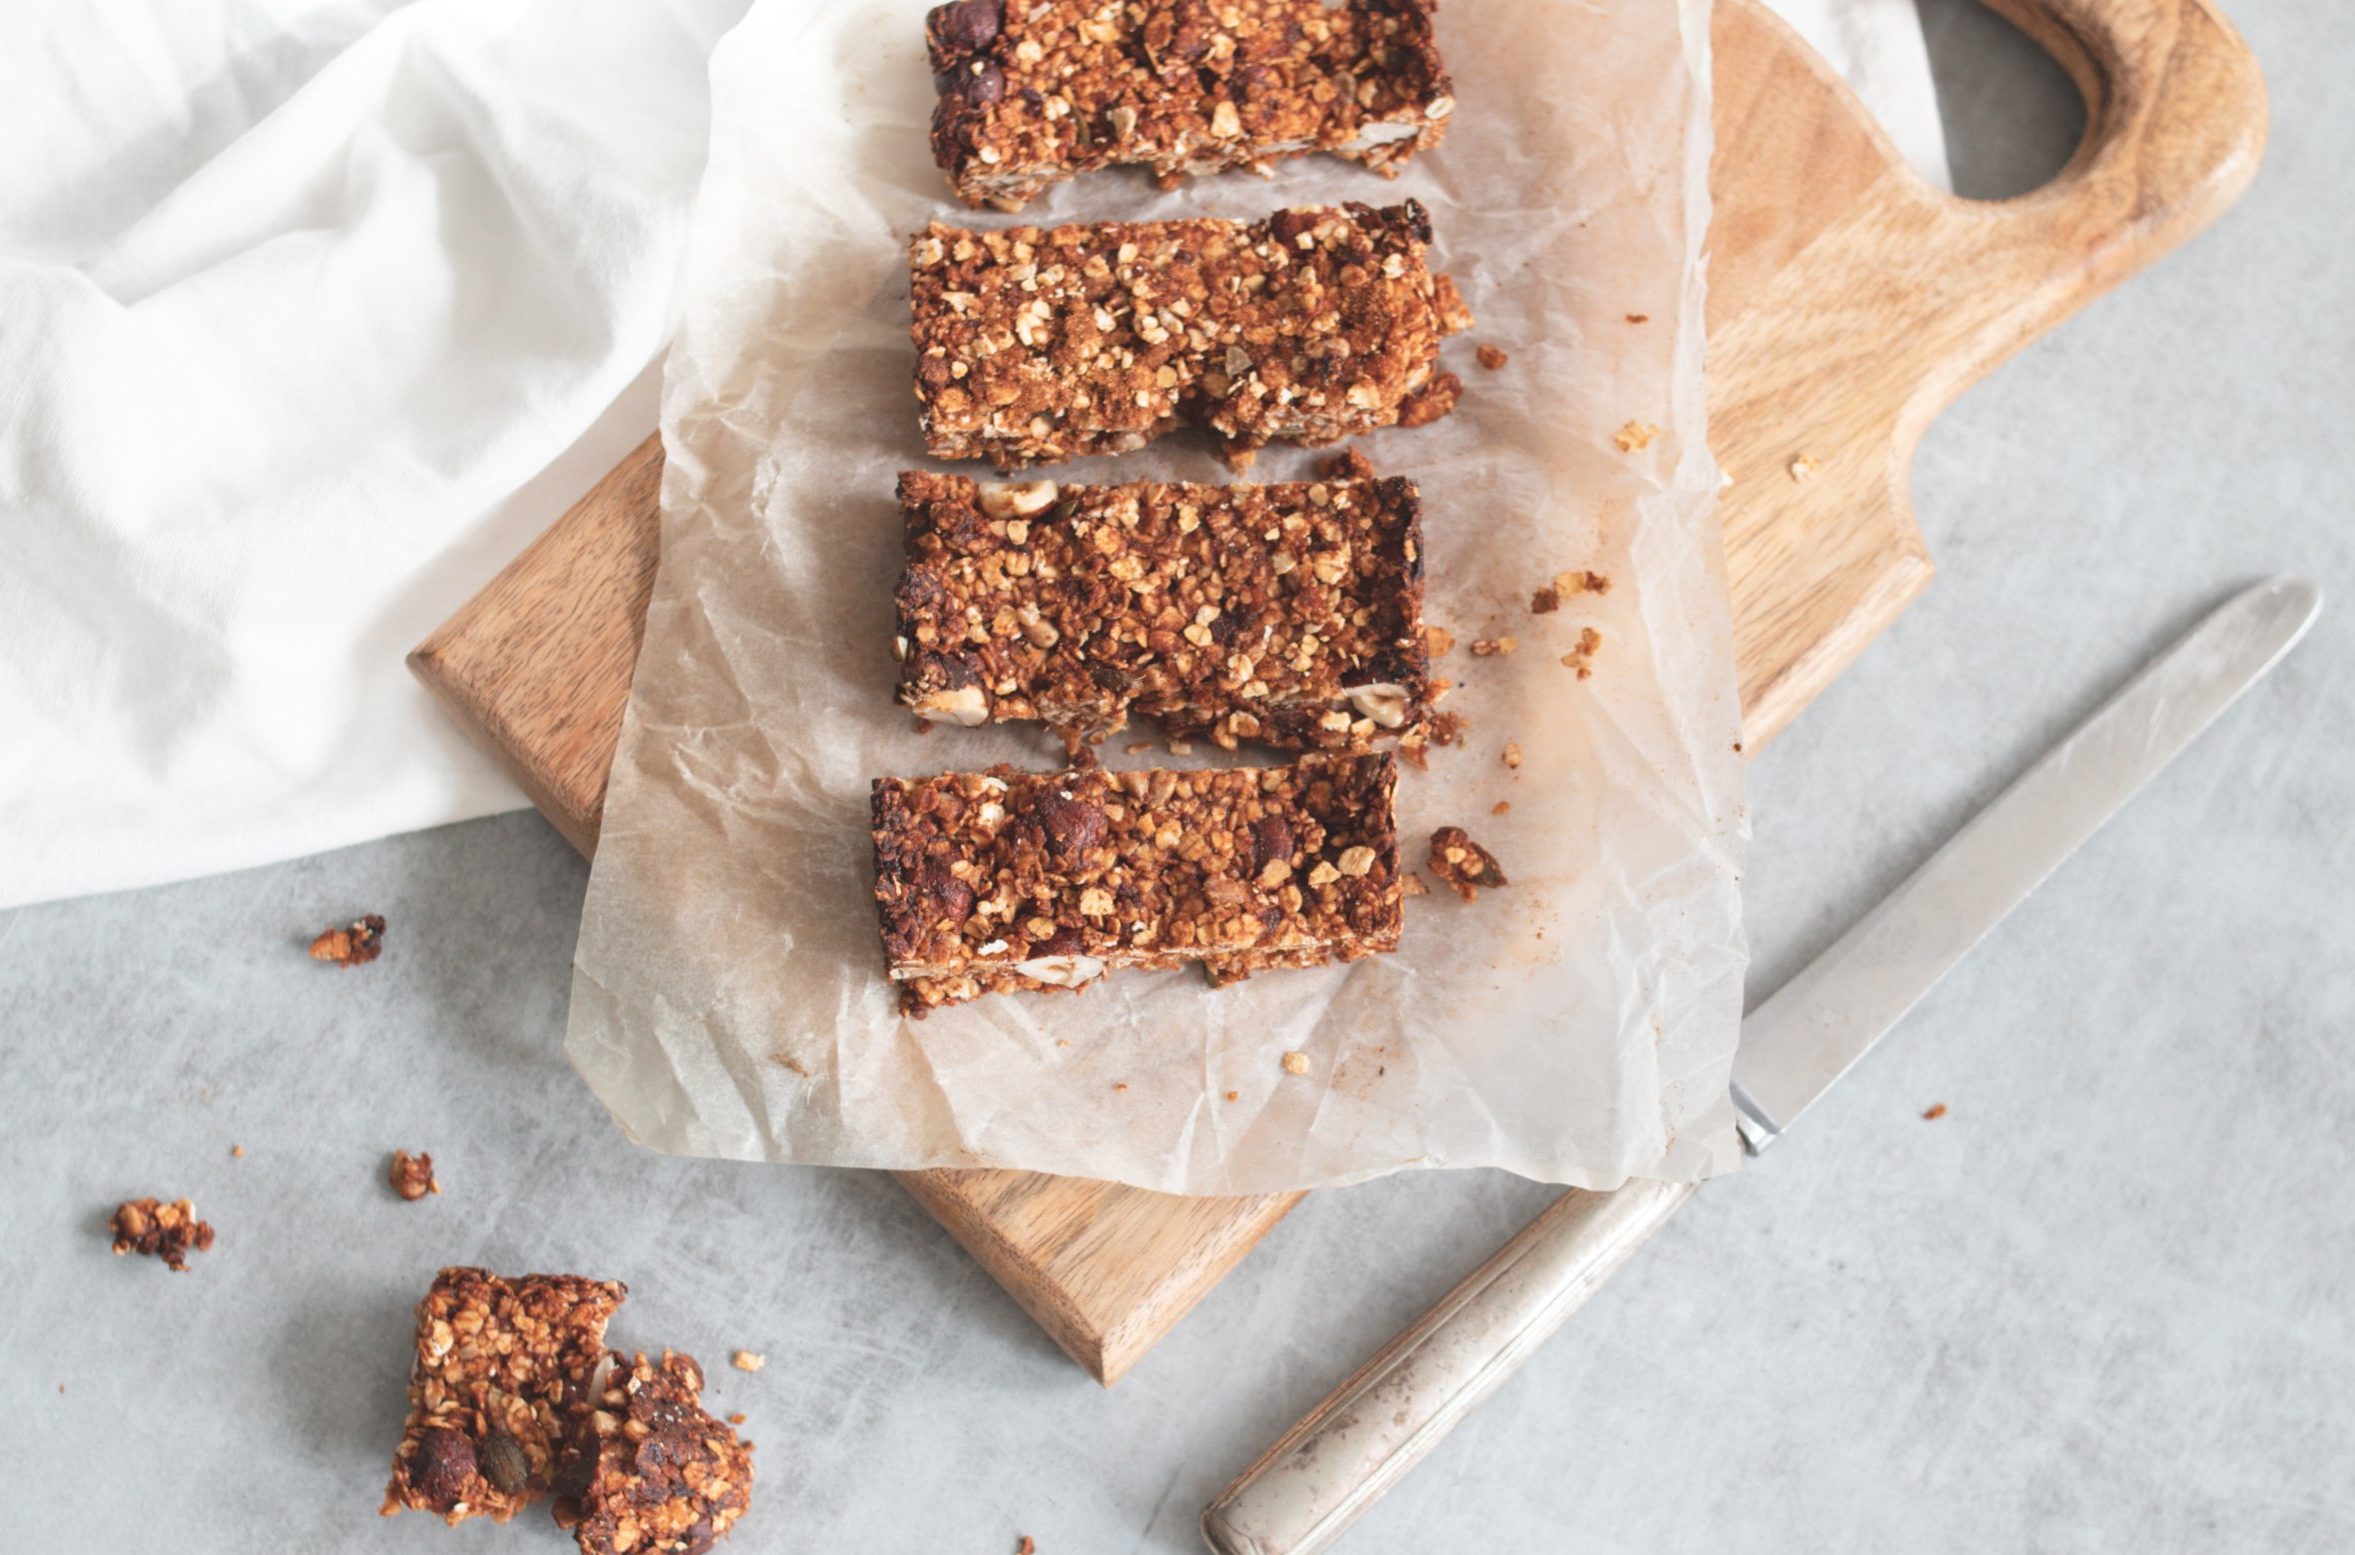 You Have To Try Making Homemade Energy Bars